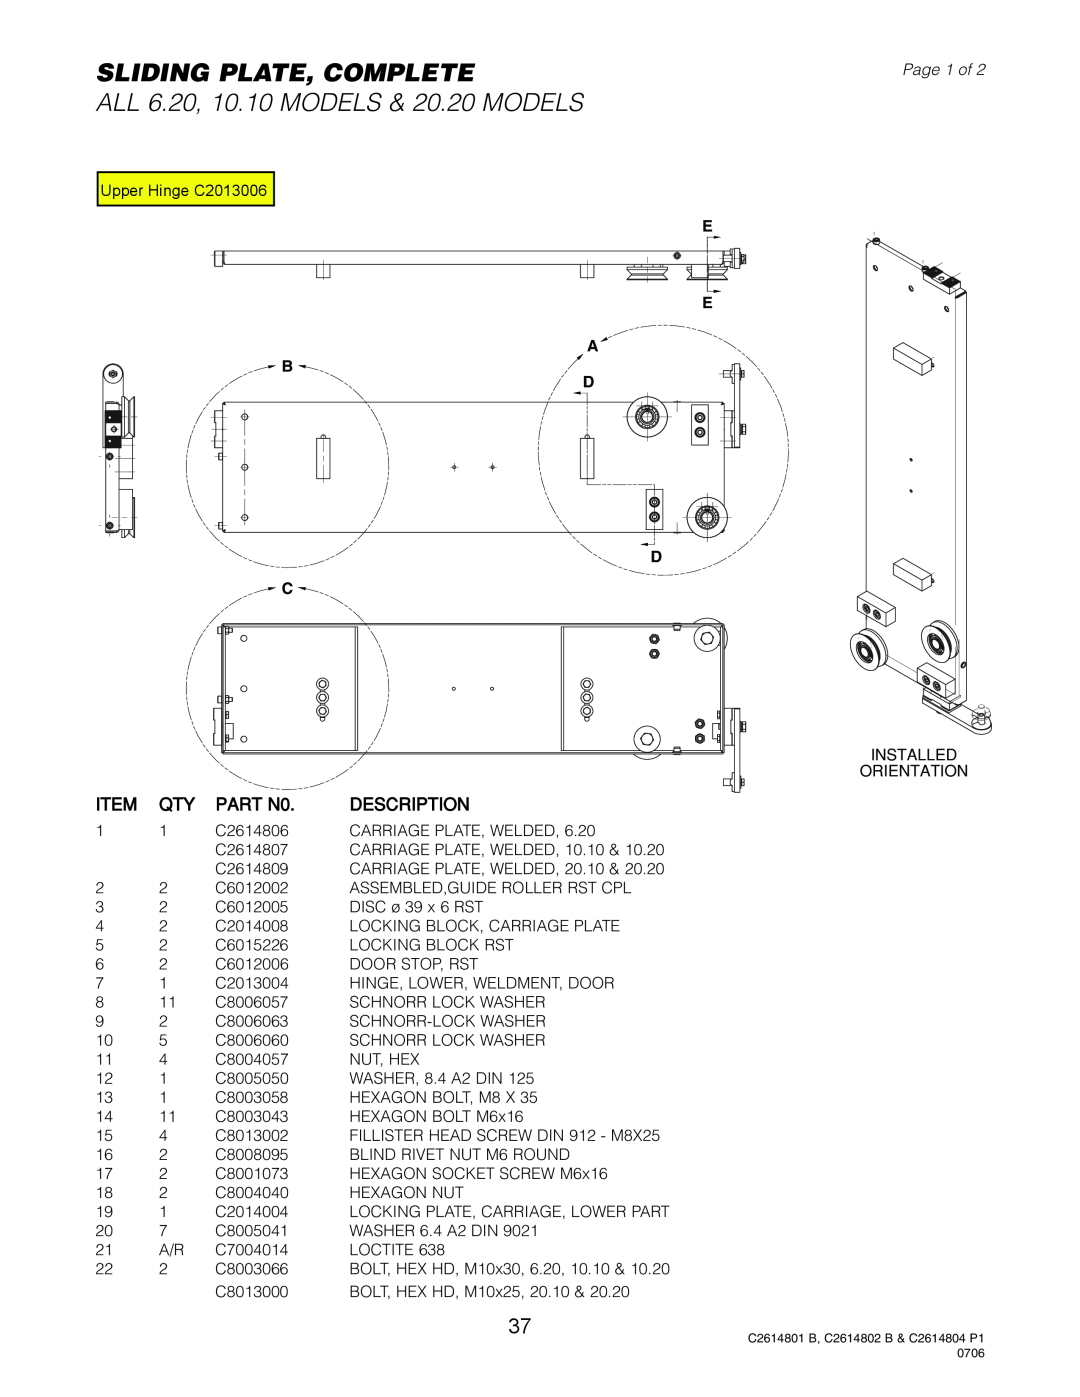 Cleveland Range OES-20.20, OEB-20.20 manual Sliding Plate, Complete, ALL 6.20, 10.10 MODELS & 20.20 MODELS, Page 1 of 